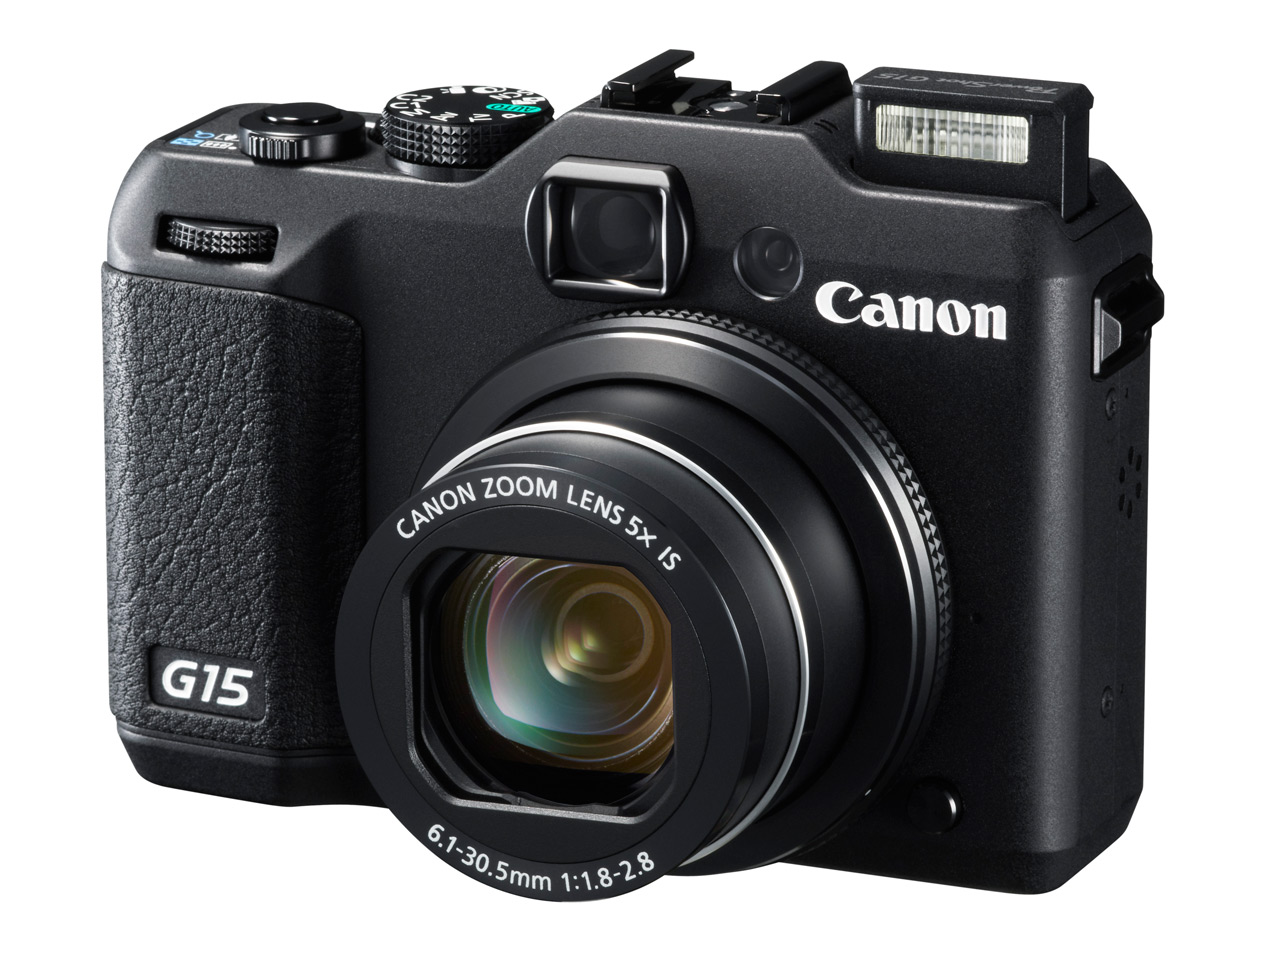 Canon powershot g15 product photo front